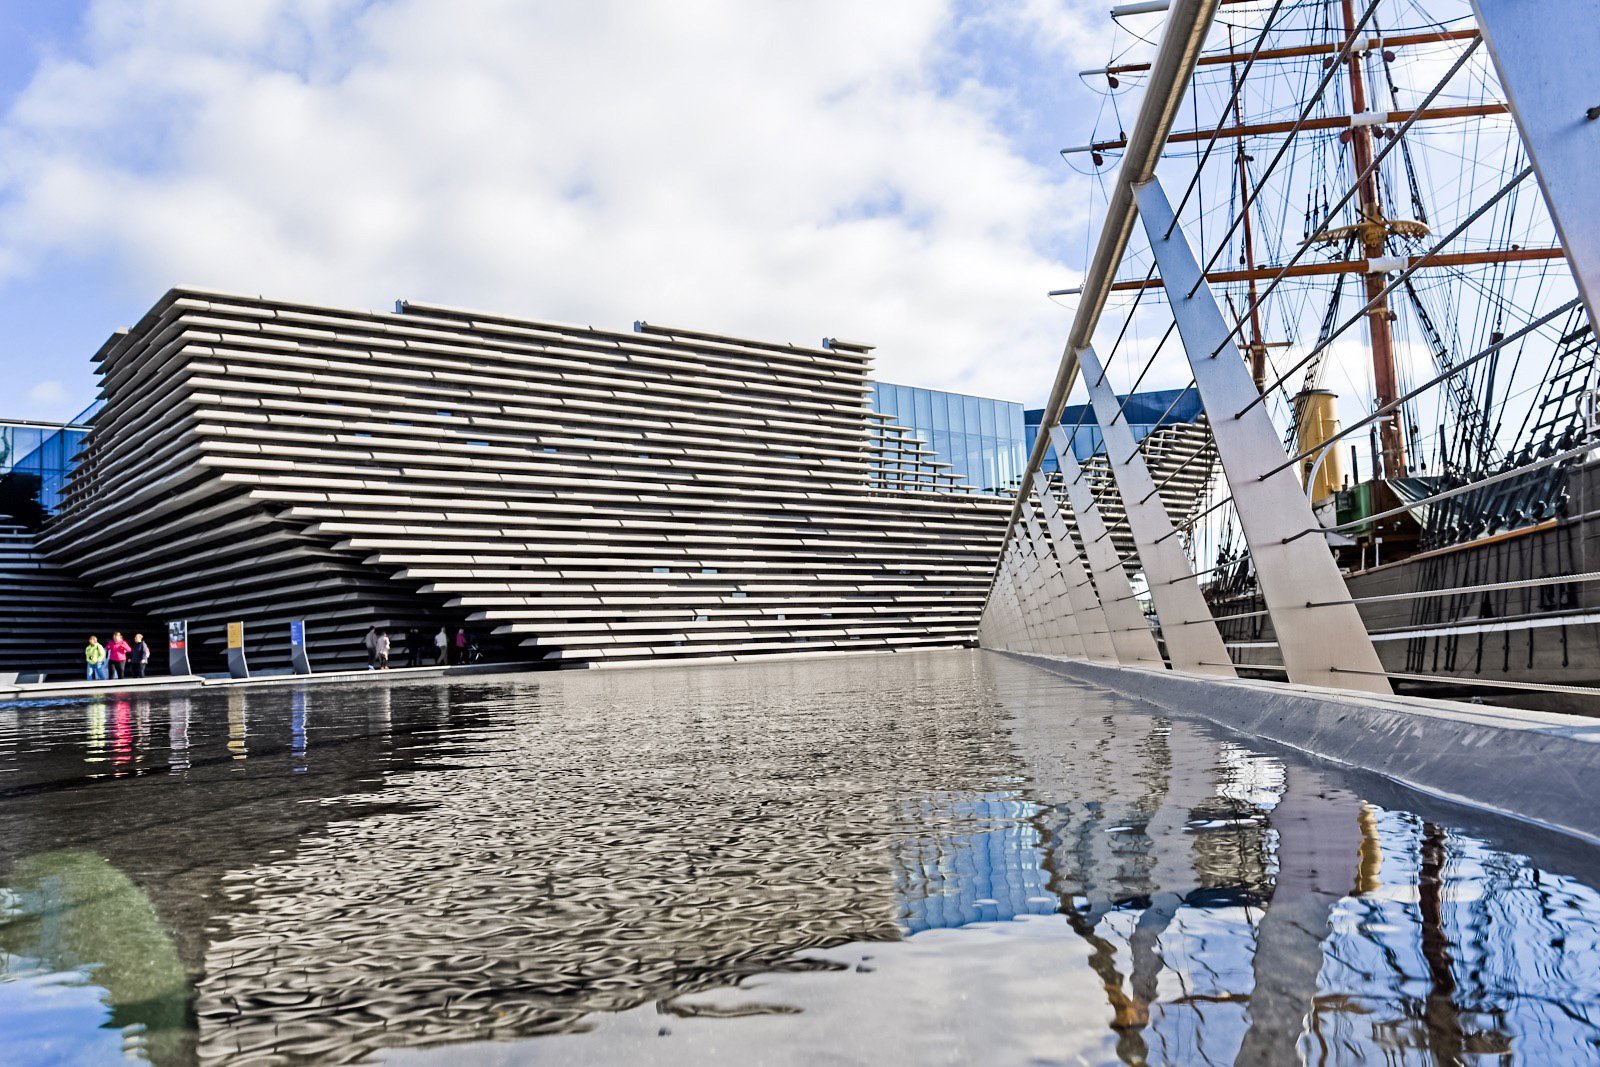 The V&A Design Museum in Dundee, Scotland